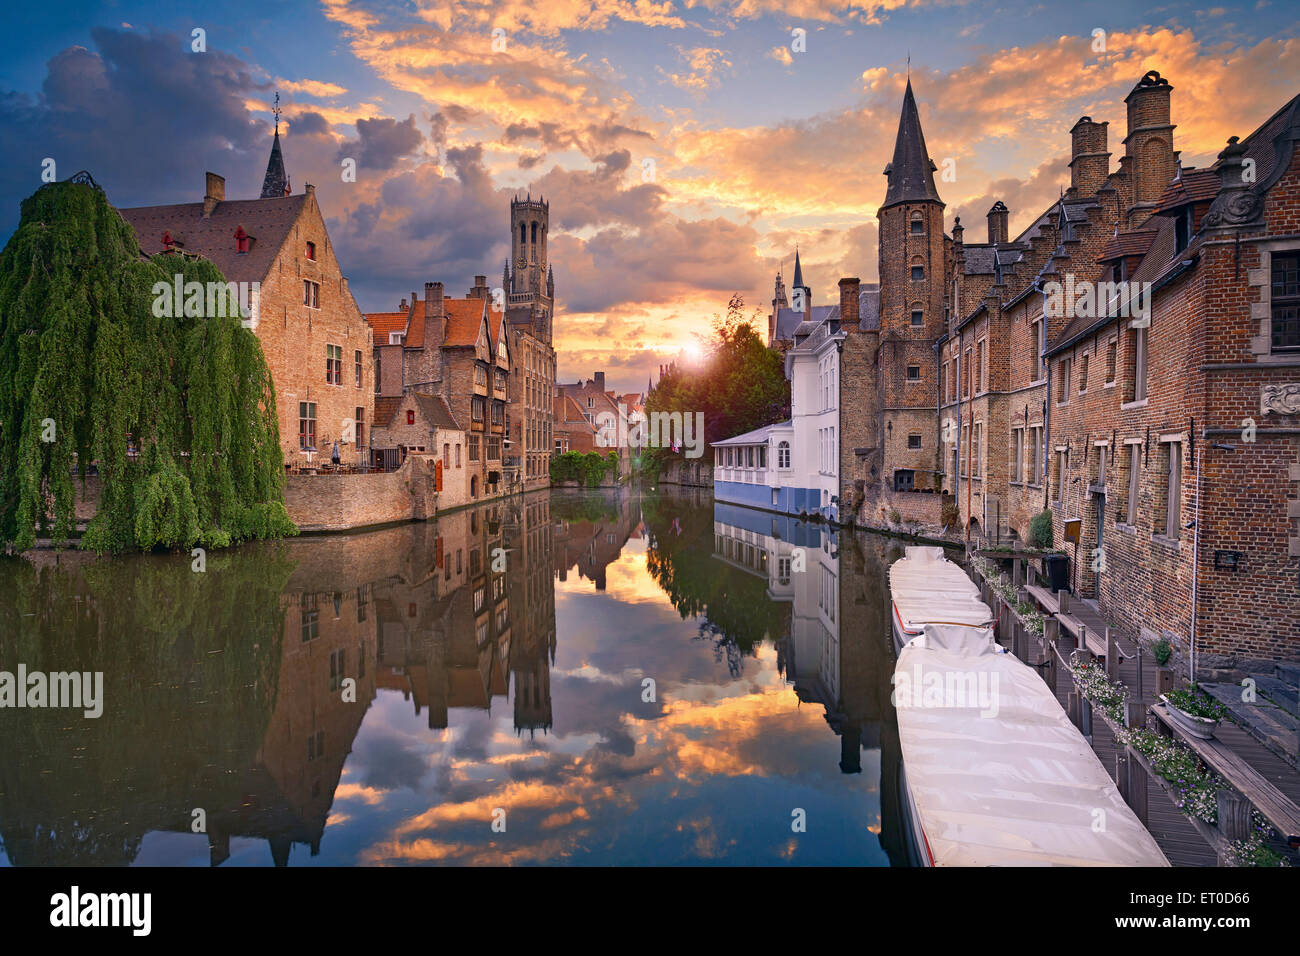 Bruges. Image of famous most photographed location in Bruges, Belgium during dramatic sunset. Stock Photo